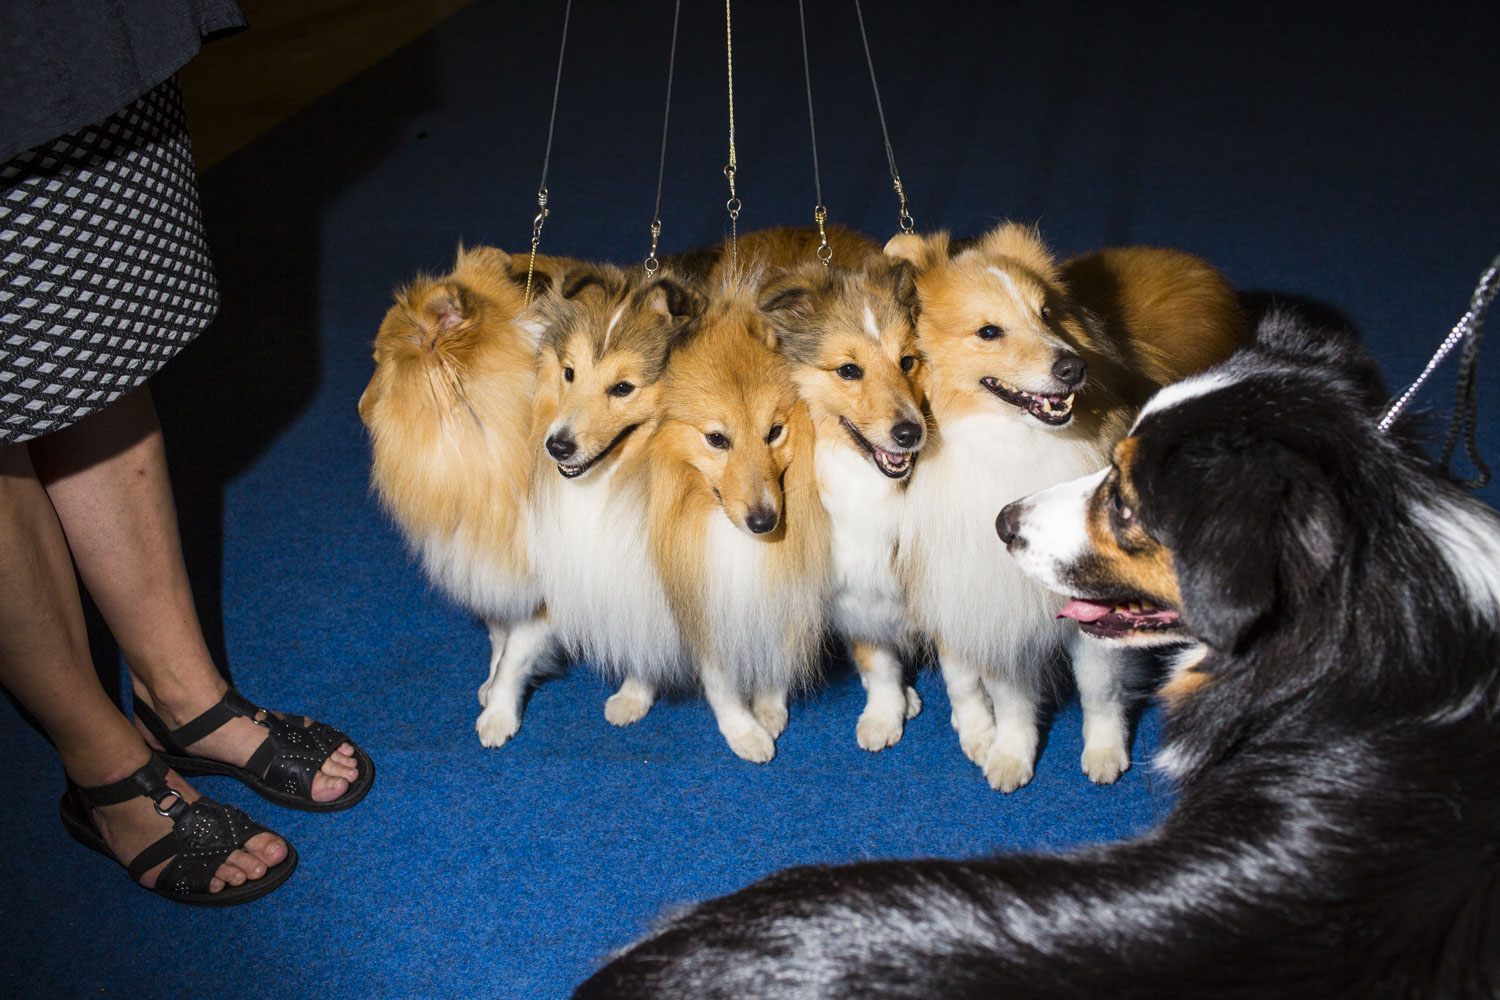 HELSINKI, FINLAND - AUG 10: Anne Reider's five Shetland Sheep dogs from Sweden make the acquaintance of another canine before competing in the Best Breeders' Group, which they won on the final day of the 2014 World Dog Show on Sunday, August 10th, 2014, in Helsinki, Finland. (Photo by Landon Nordeman)